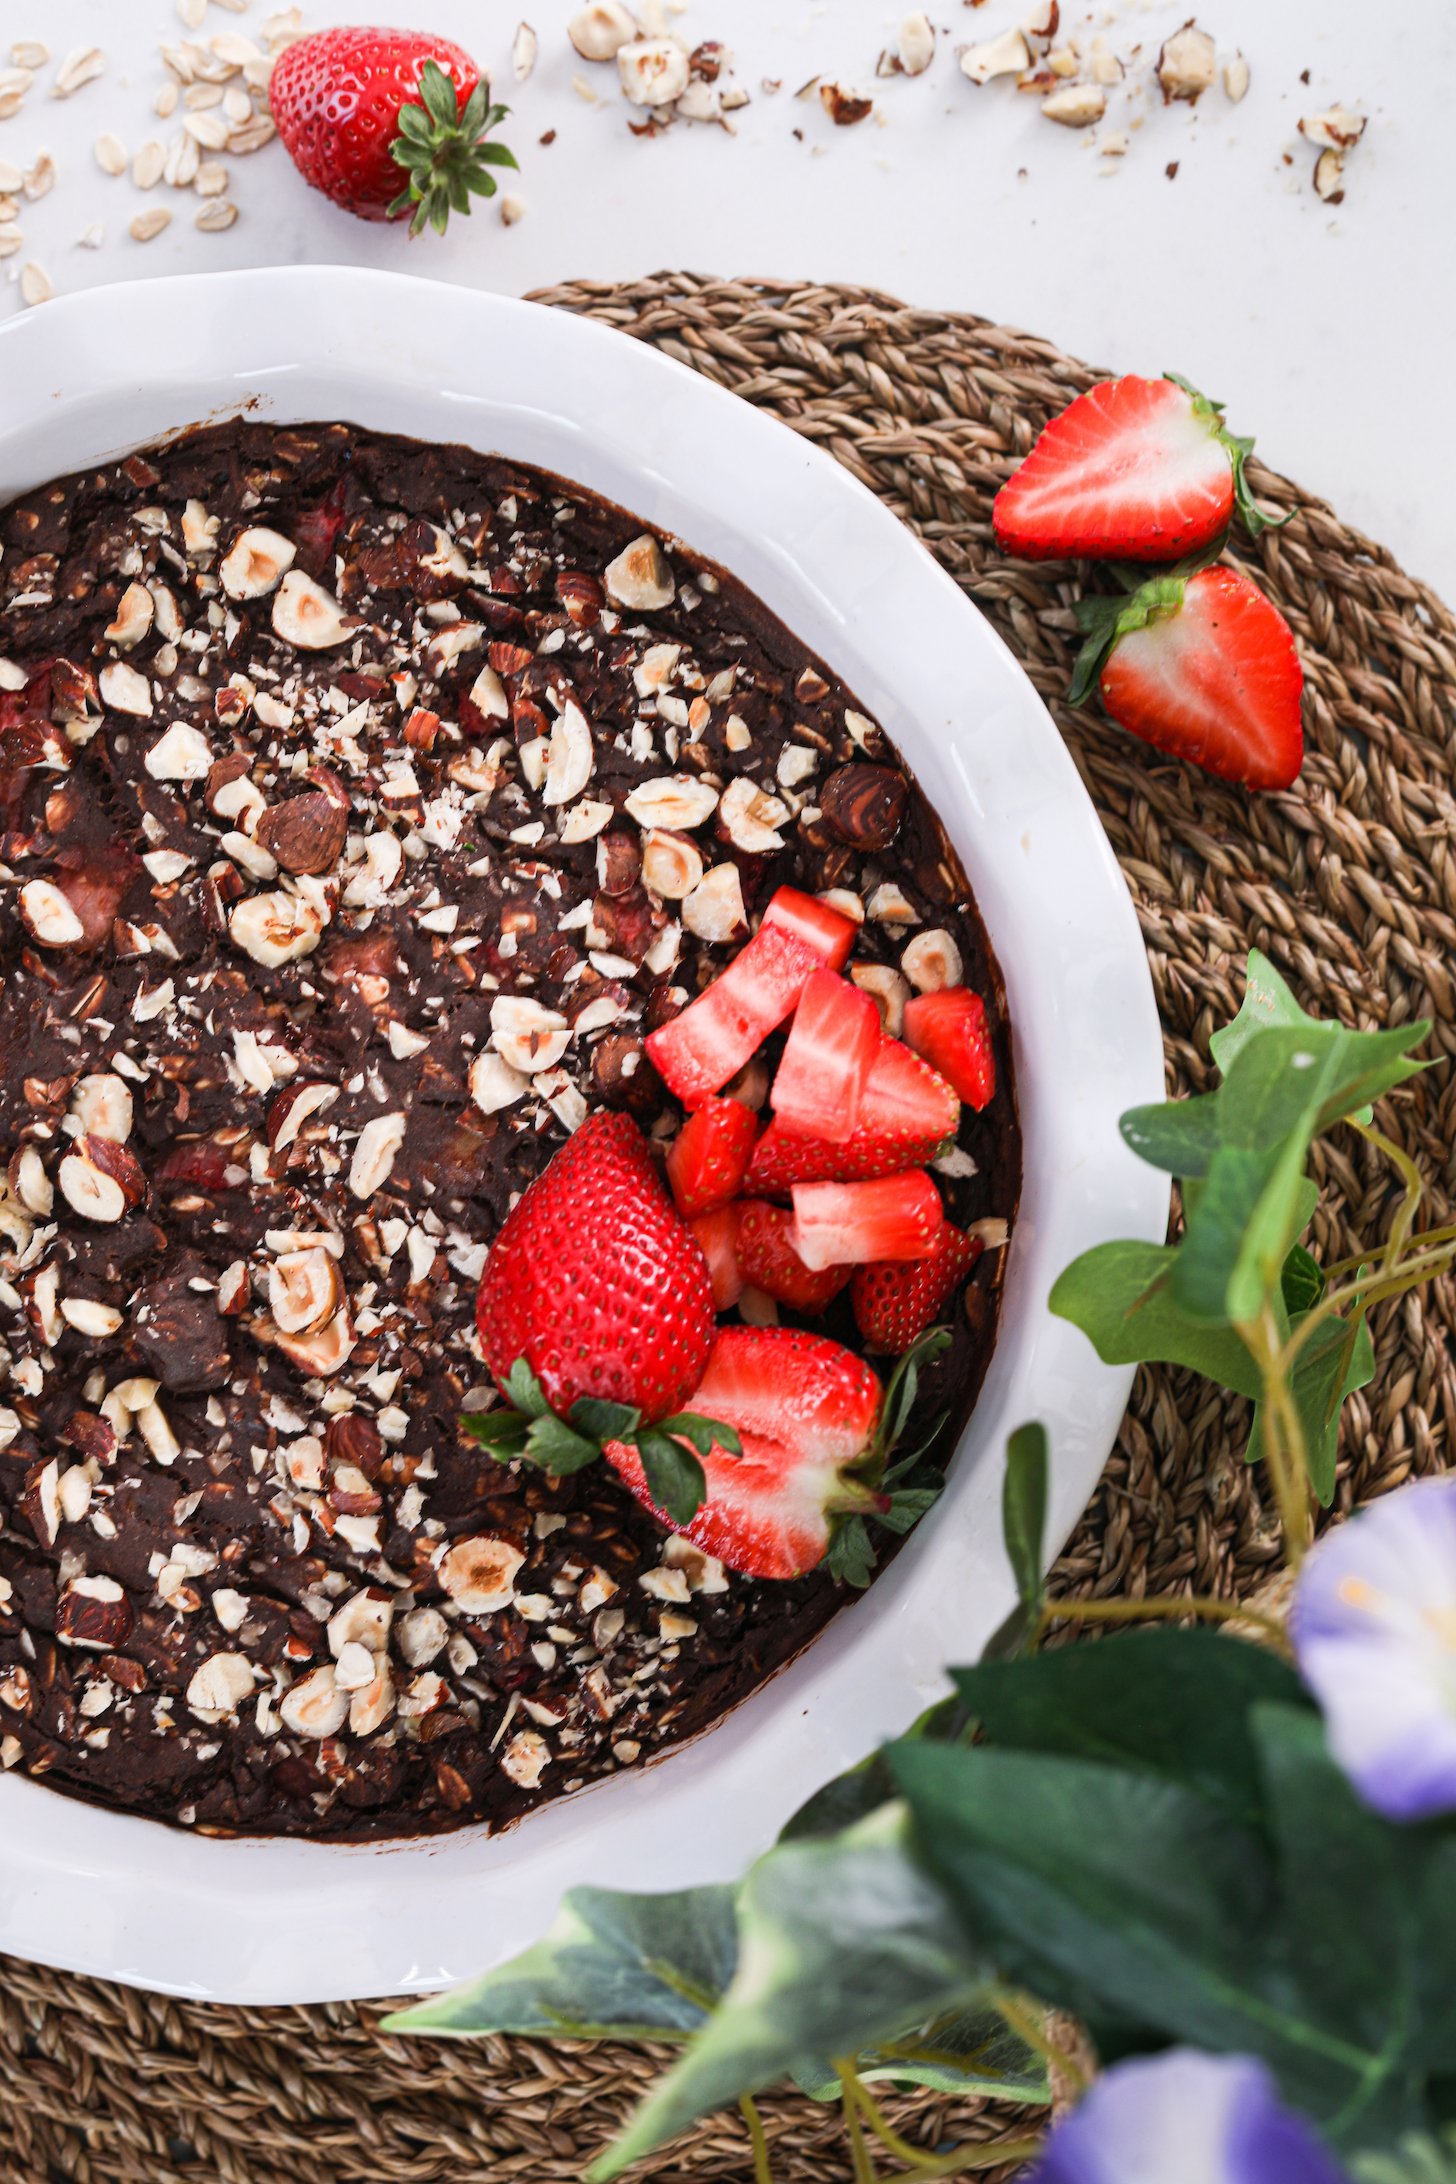 Top view of a bowl of chocolate dessert topped with nuts and a small pile of strawberries on one side.